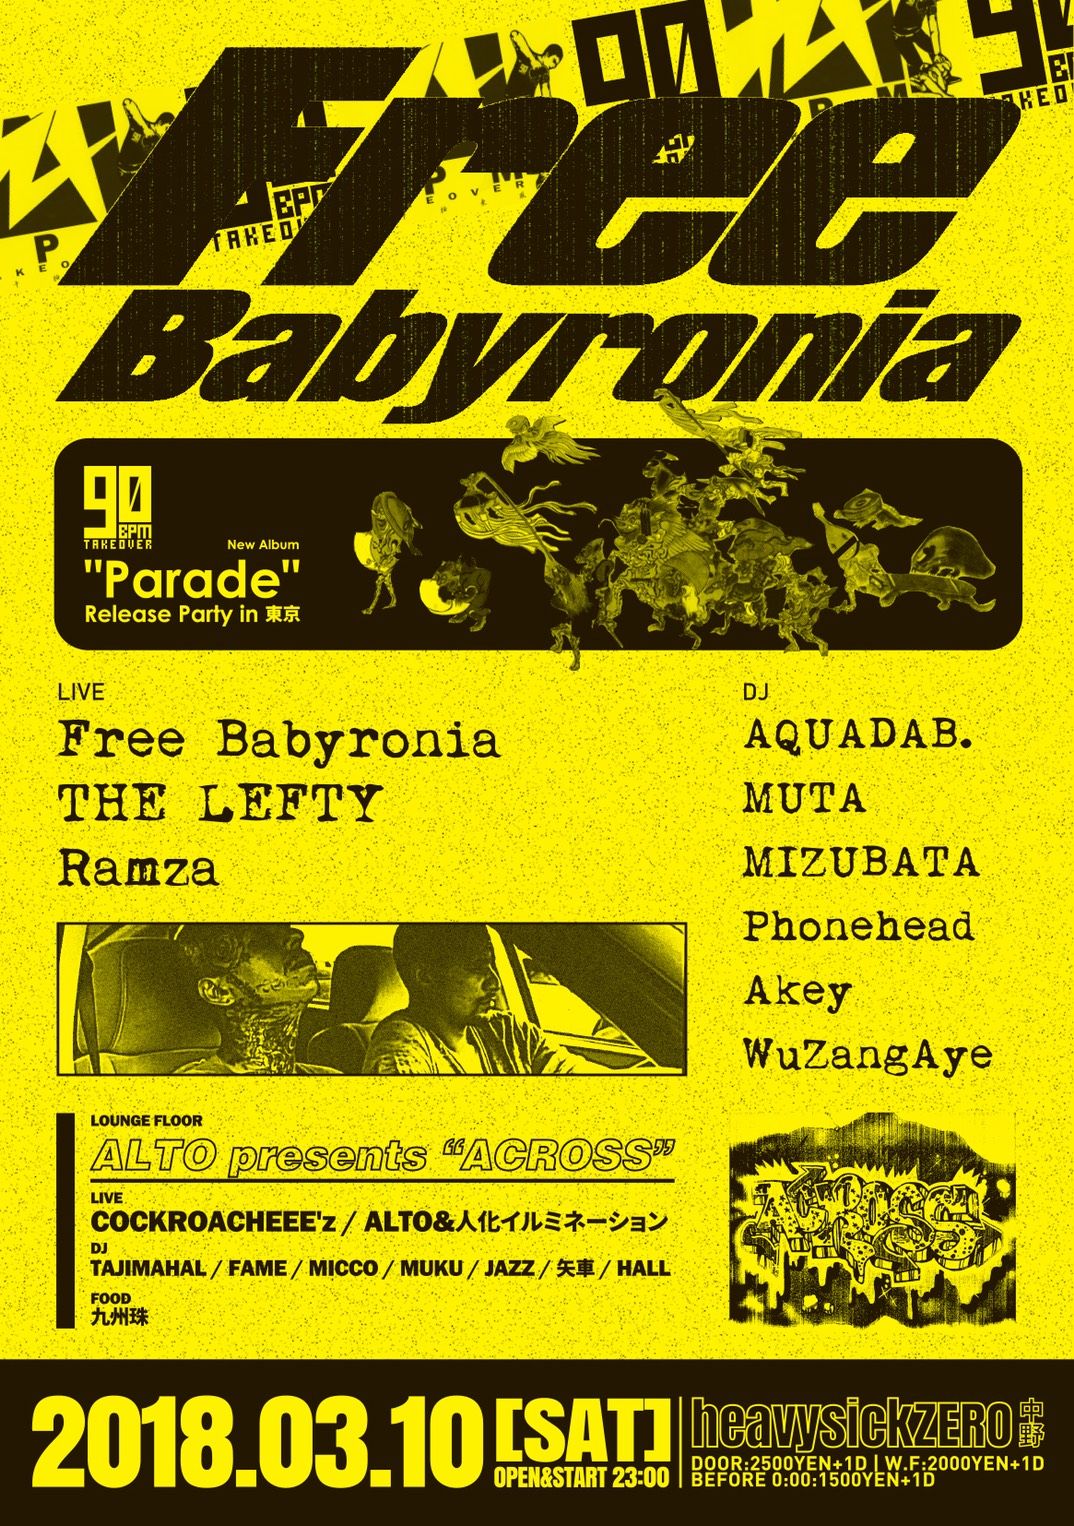 90BPM TAKEOVER / ACROSS ～FREE BABYRONIA「PARADE 」Release Party～